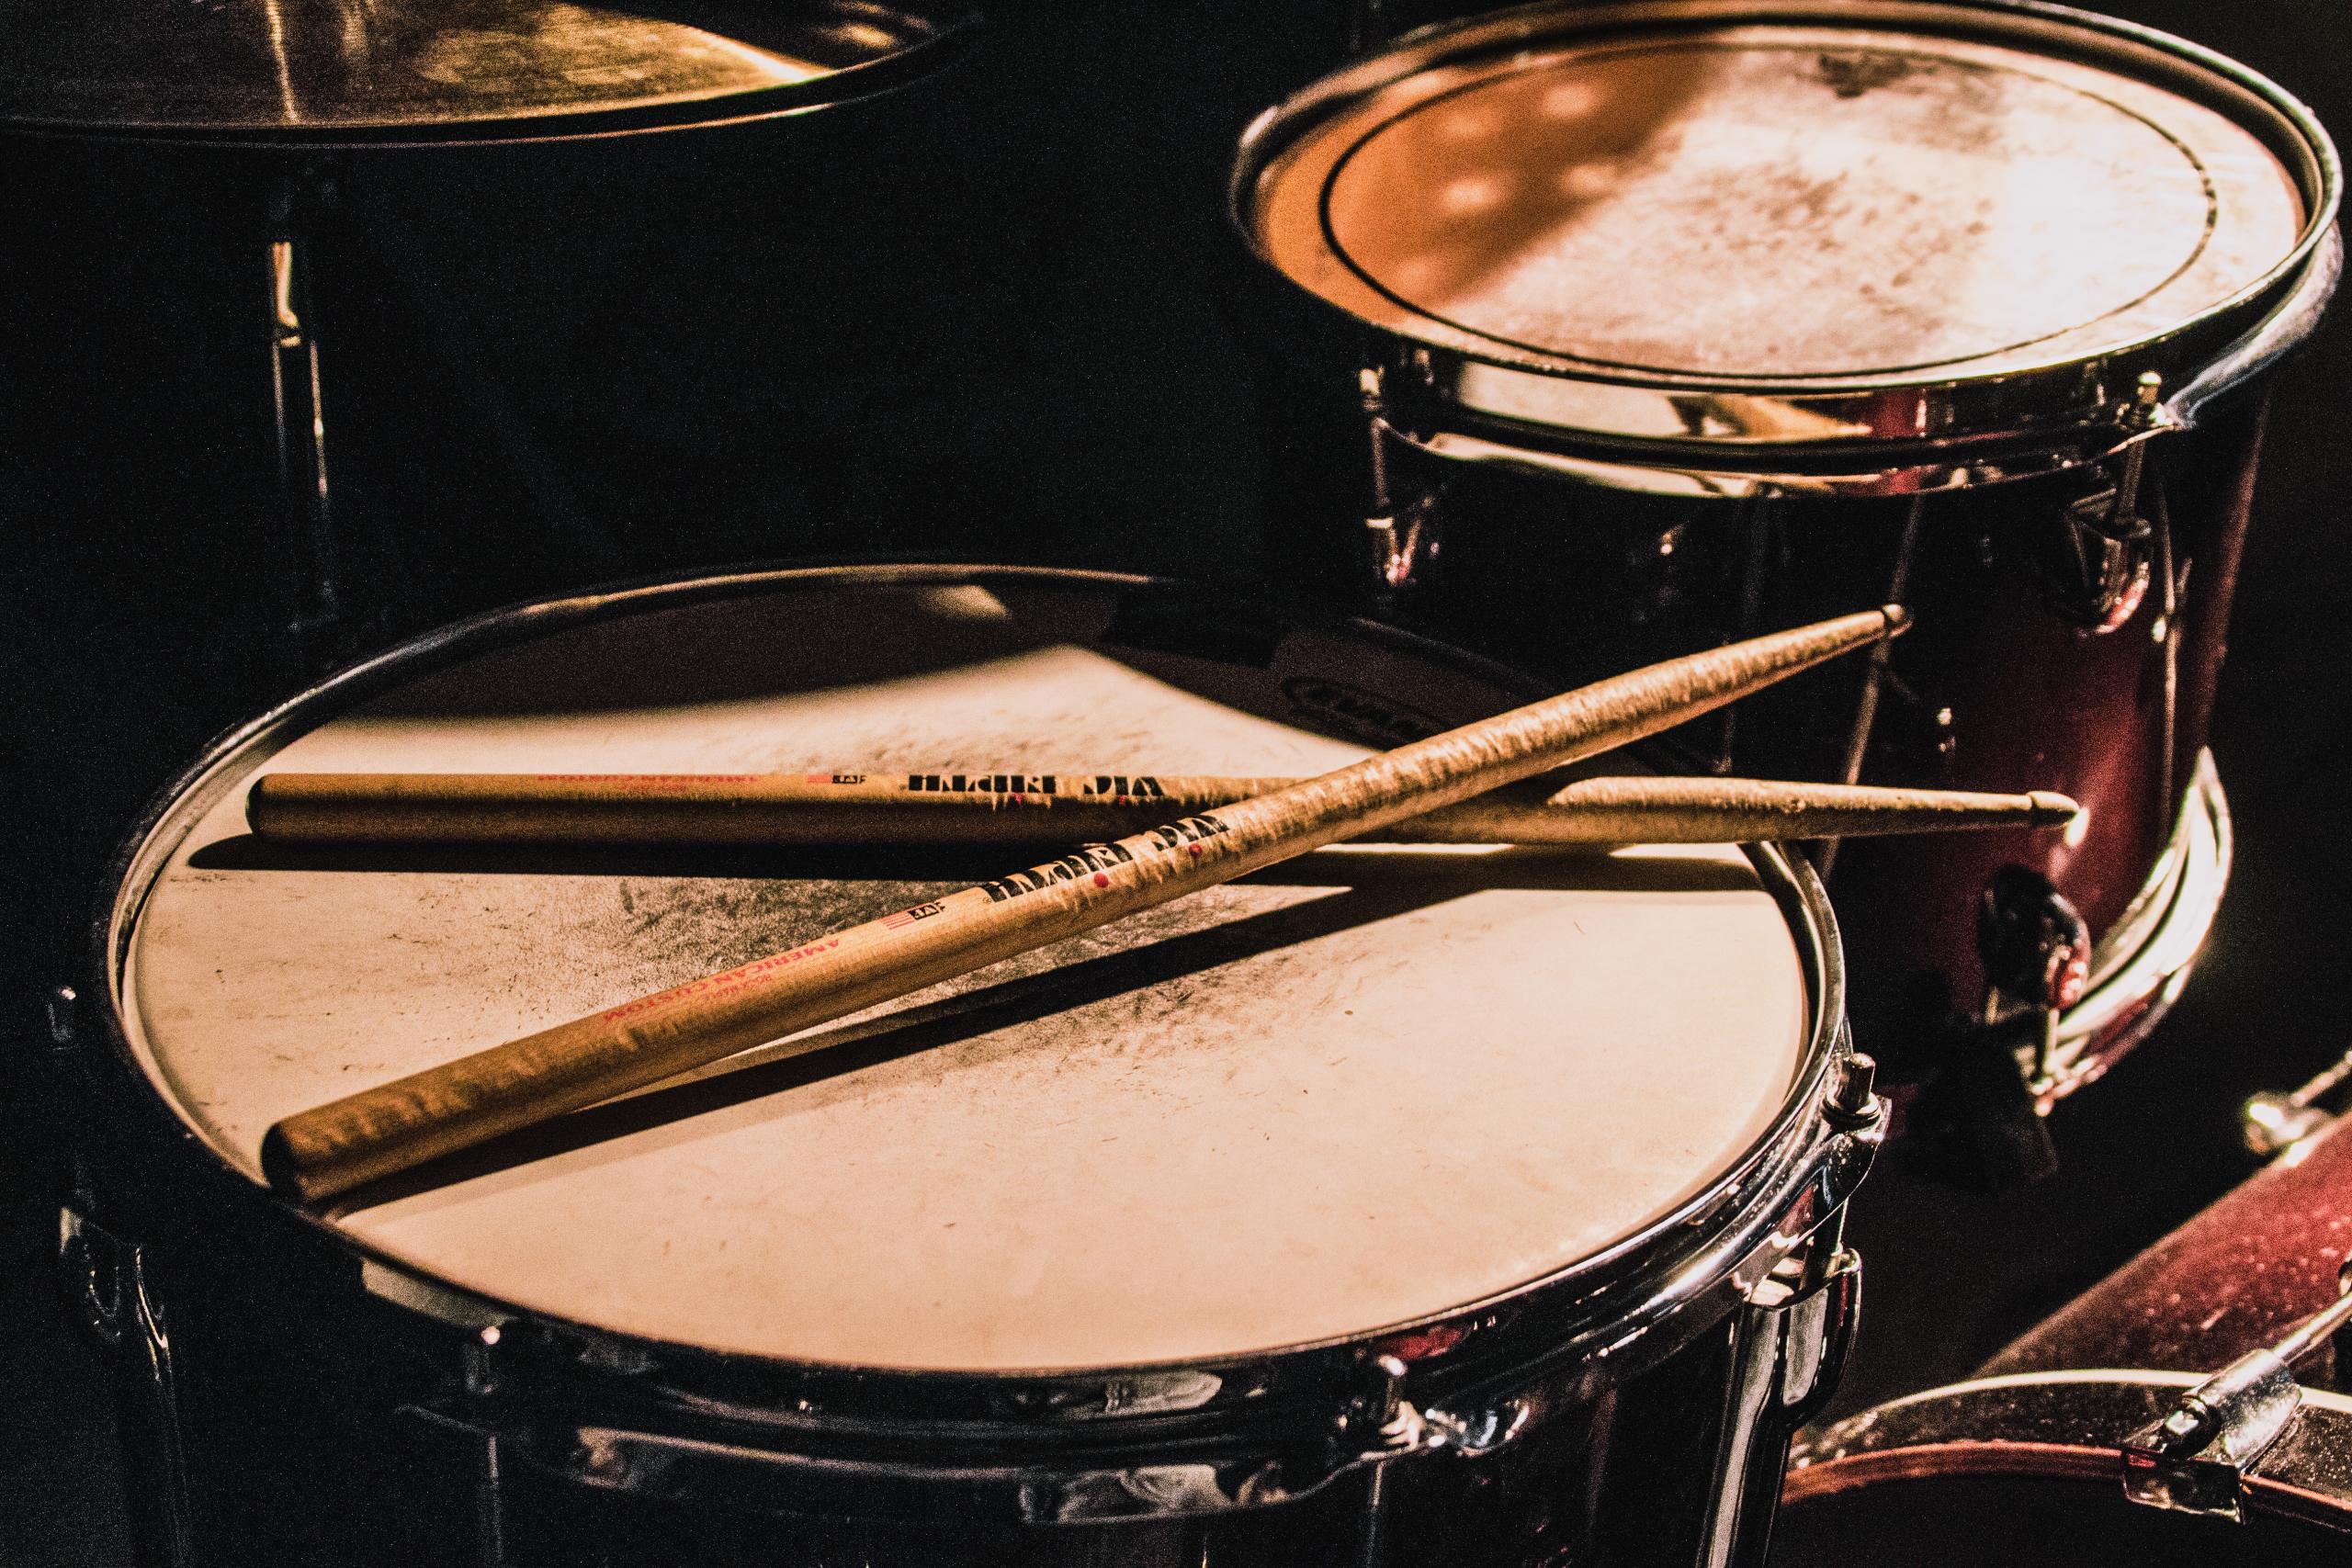 Close-up of a drum set on which two sticks are lying crossed.